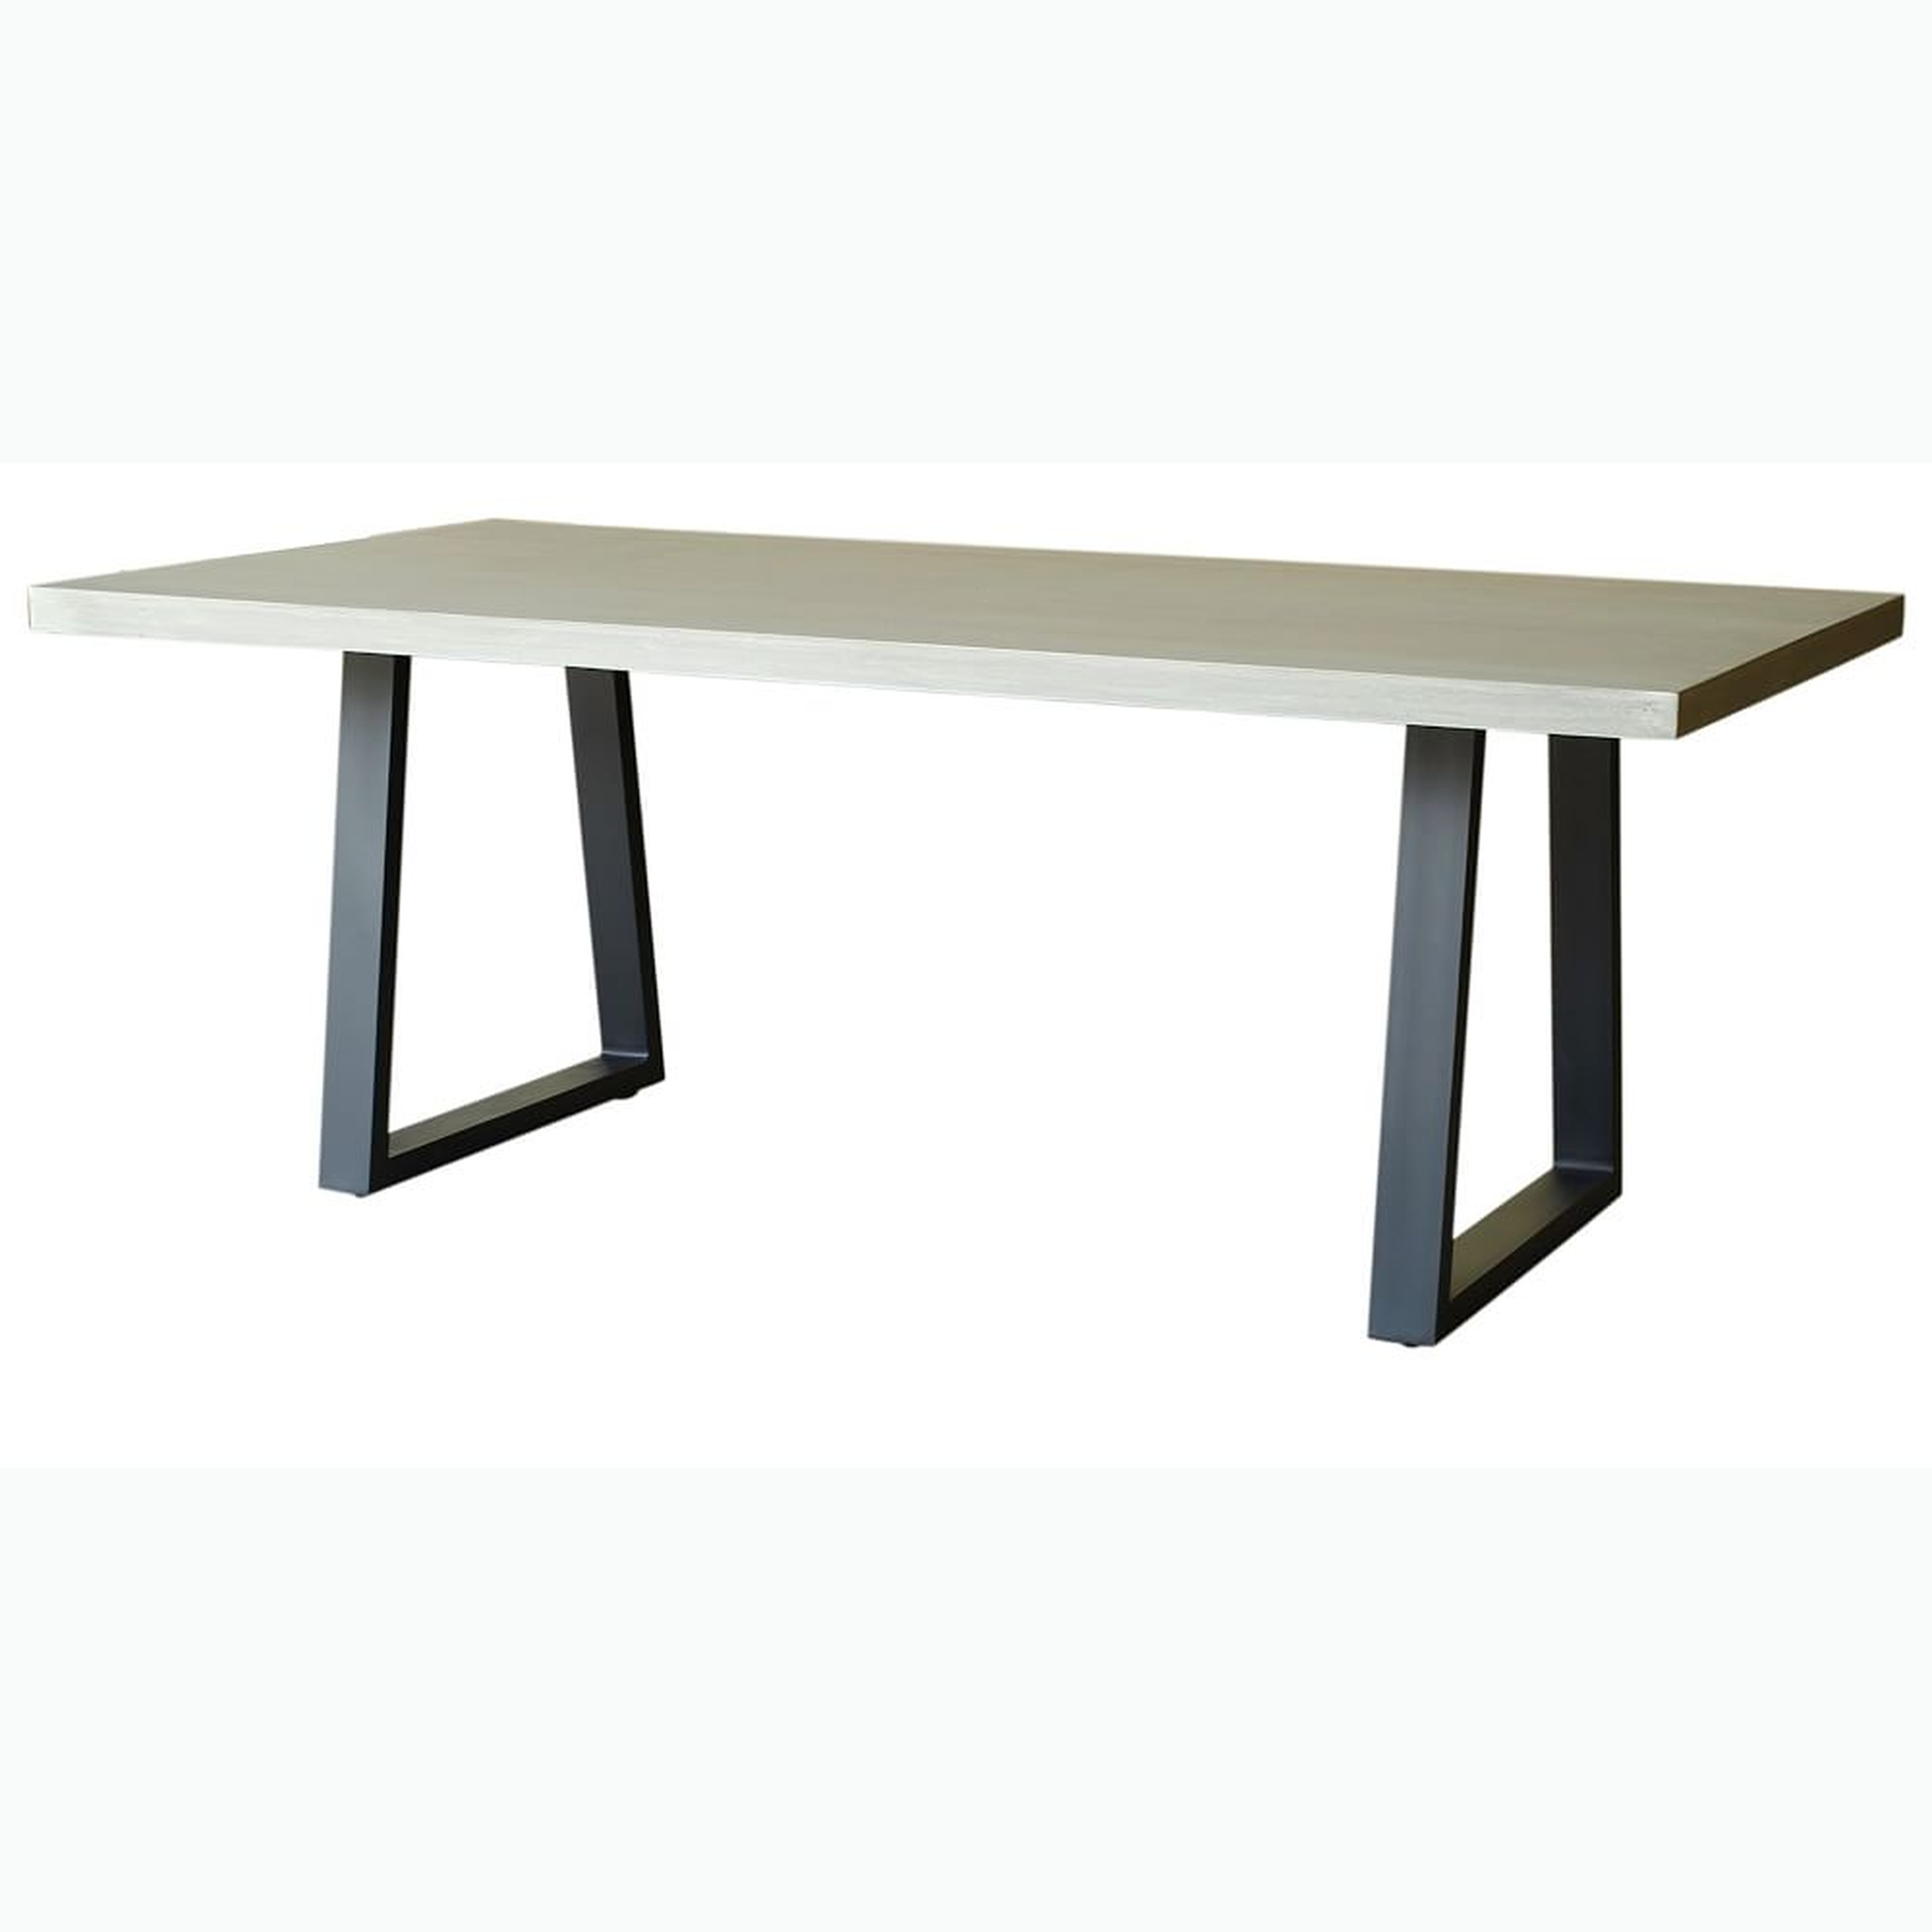 Slab Outdoor Dining Table, 79" - West Elm